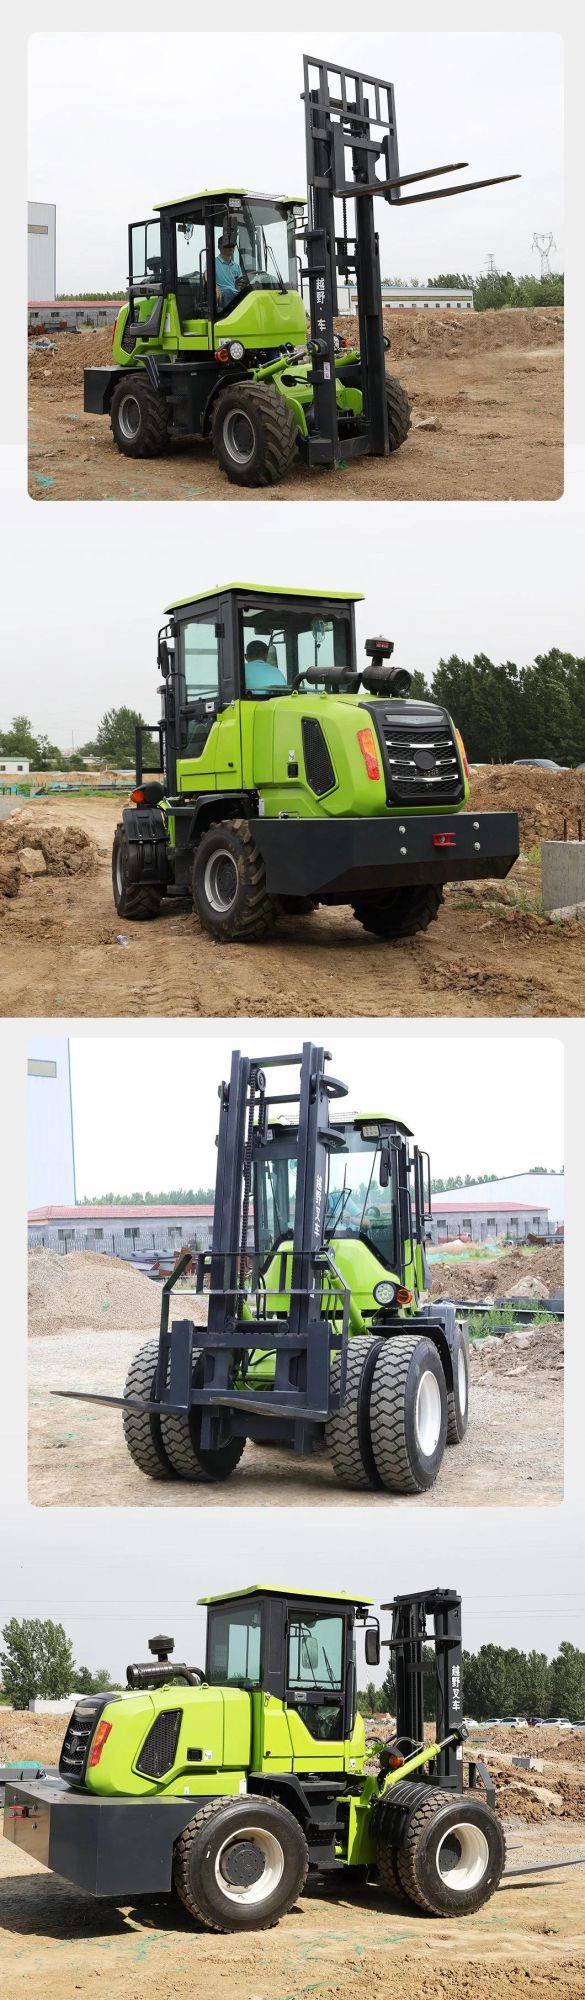 Cross Country off-Road Forklift Telescopic 3-5 Tons Diesel Forklift with Four Wheel Drive